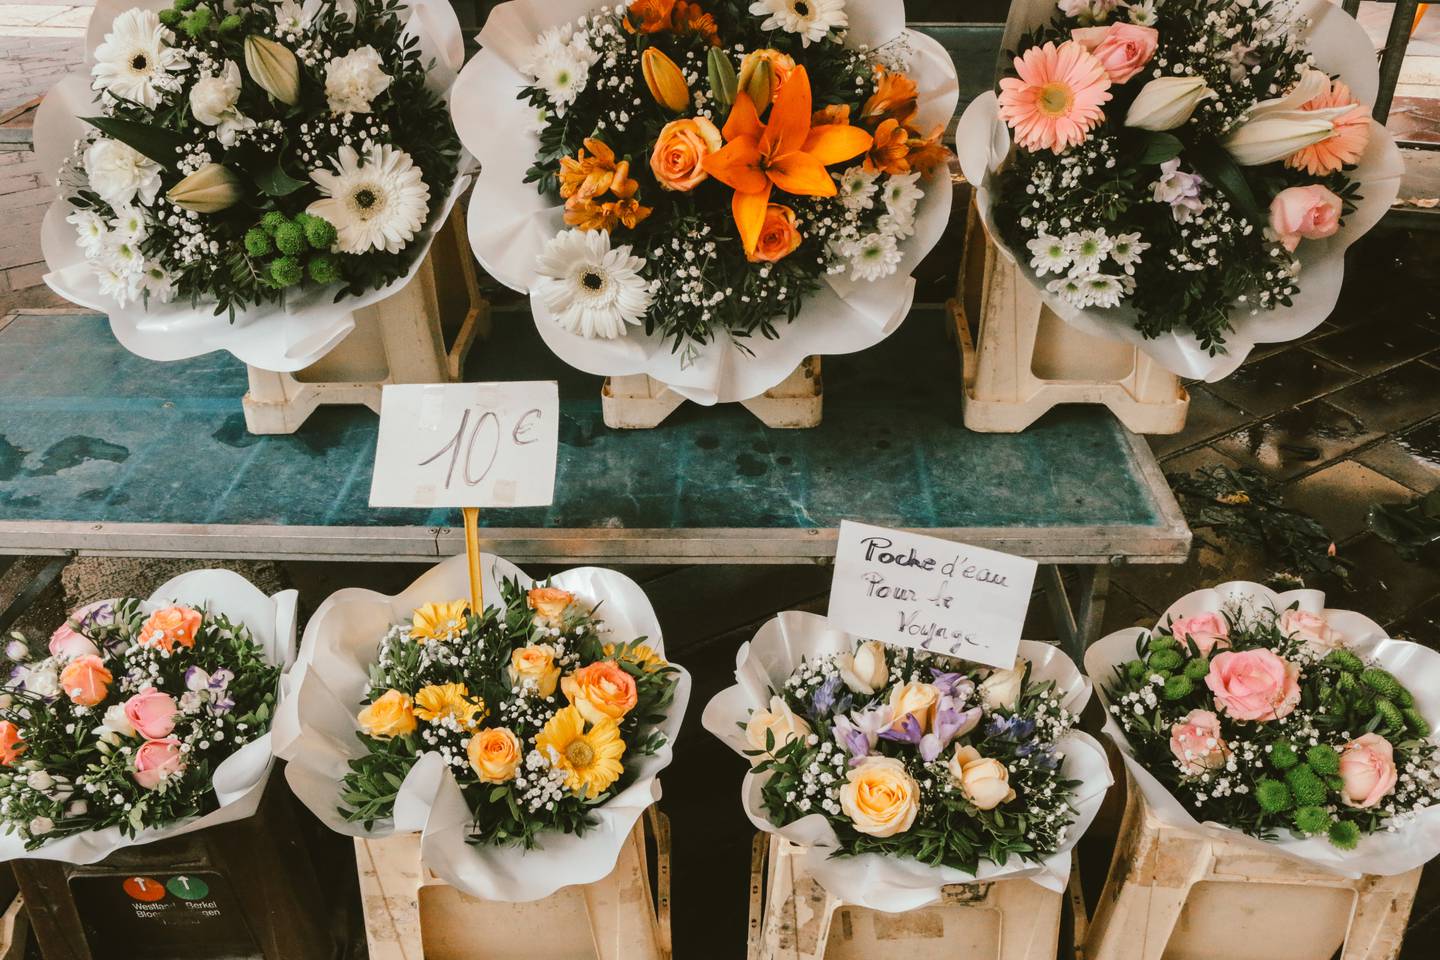 Early risers can explore the flower market in Nice, which has been running for more than 100 years. Photo: Kylie Pazz / Unsplash